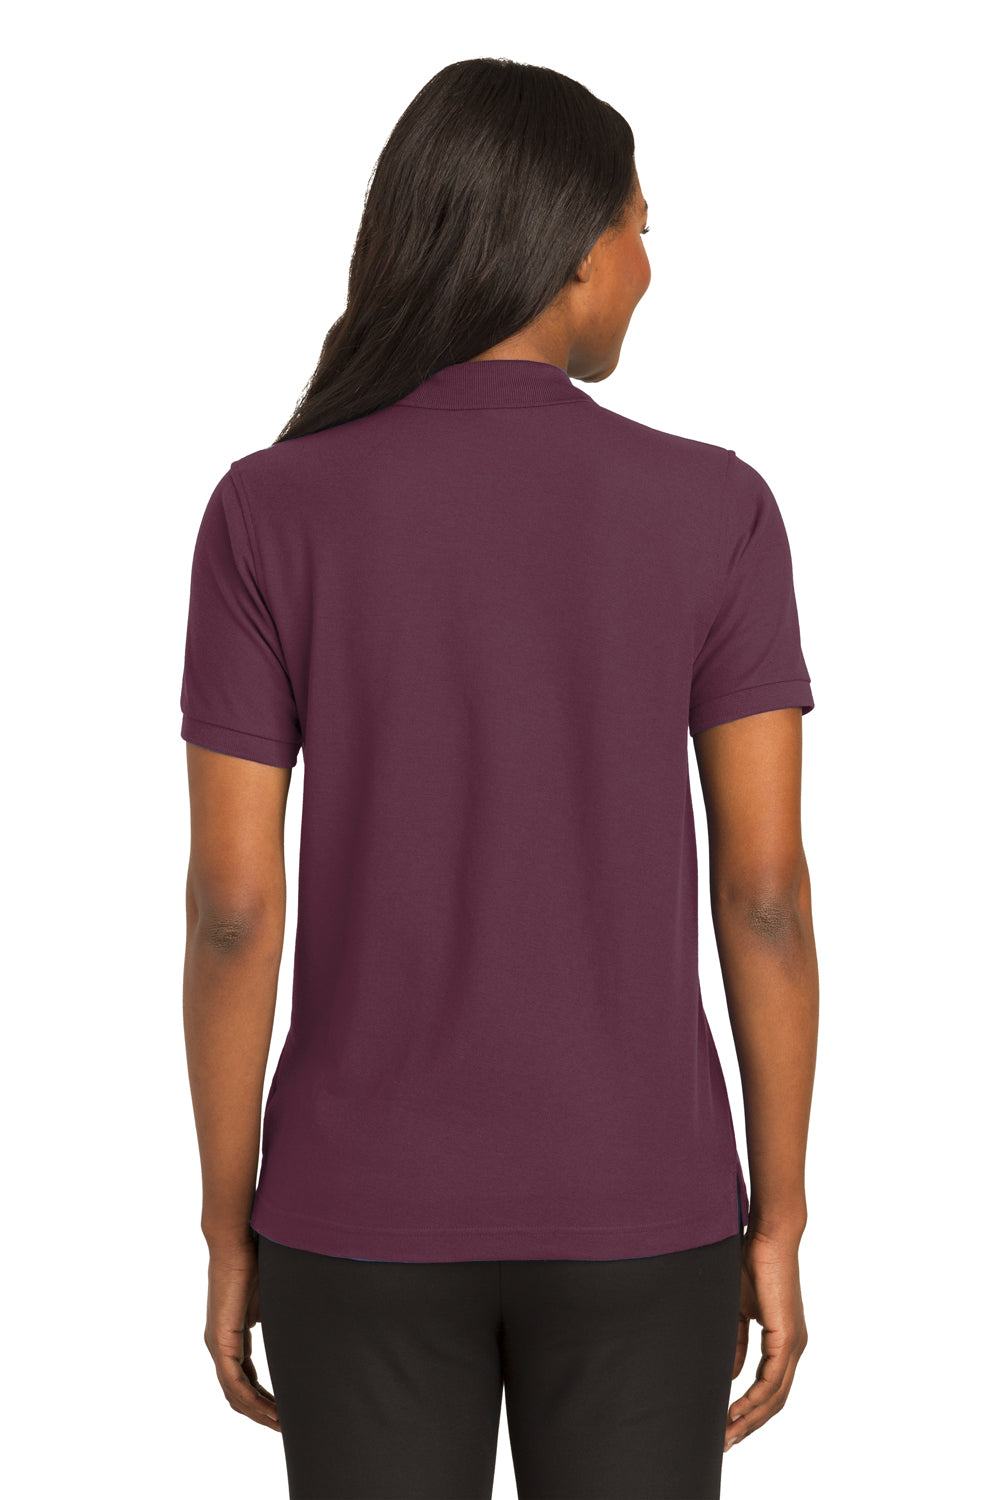 Port Authority L500 Womens Silk Touch Wrinkle Resistant Short Sleeve Polo Shirt Maroon Back